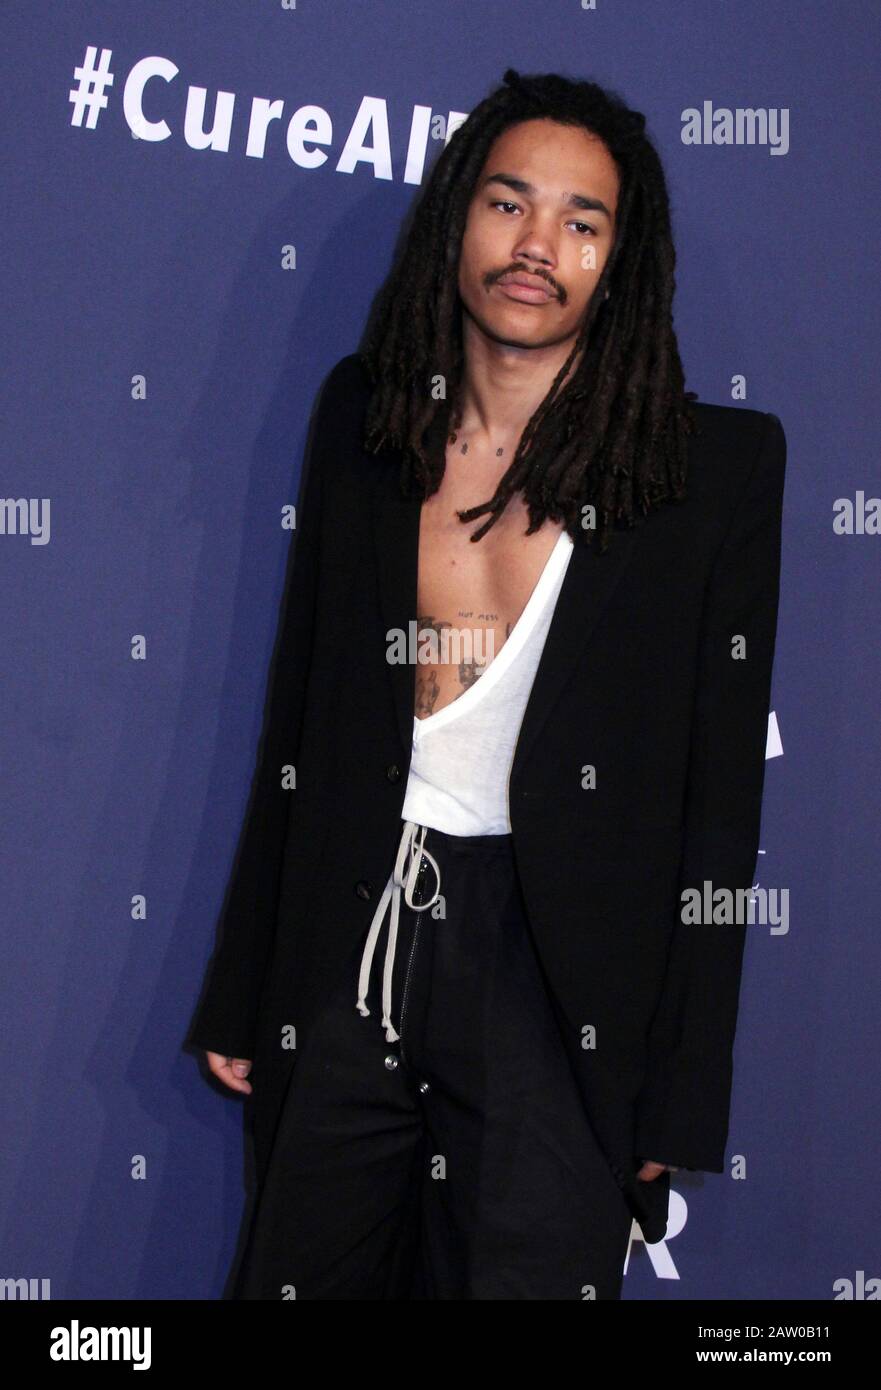 New York, NY, USA. 5th Feb, 2020. Luka Sabbat at the 22nd annual amfAR Gala Benefit for AIDS Research at Cipriani Wall Street in New York City on February 5, 2020. Credit: Erik Nielsen/Media Punch/Alamy Live News Stock Photo